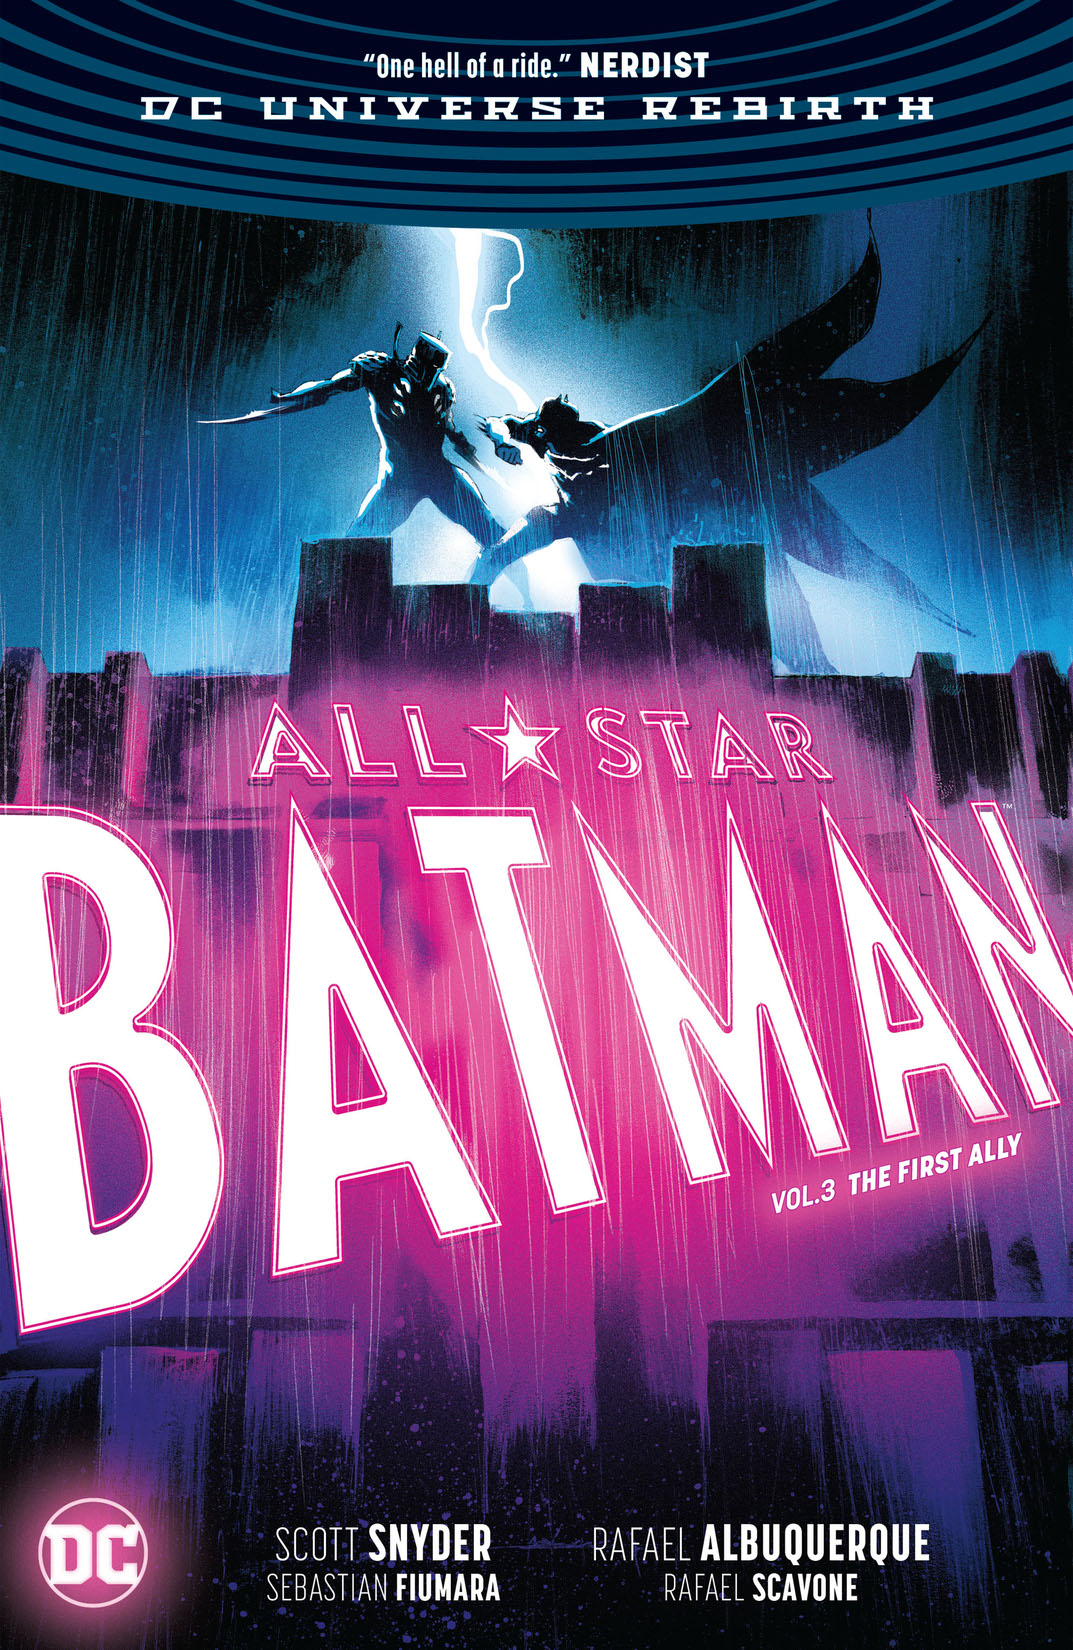 All Star Batman Vol. 3: The First Ally preview images